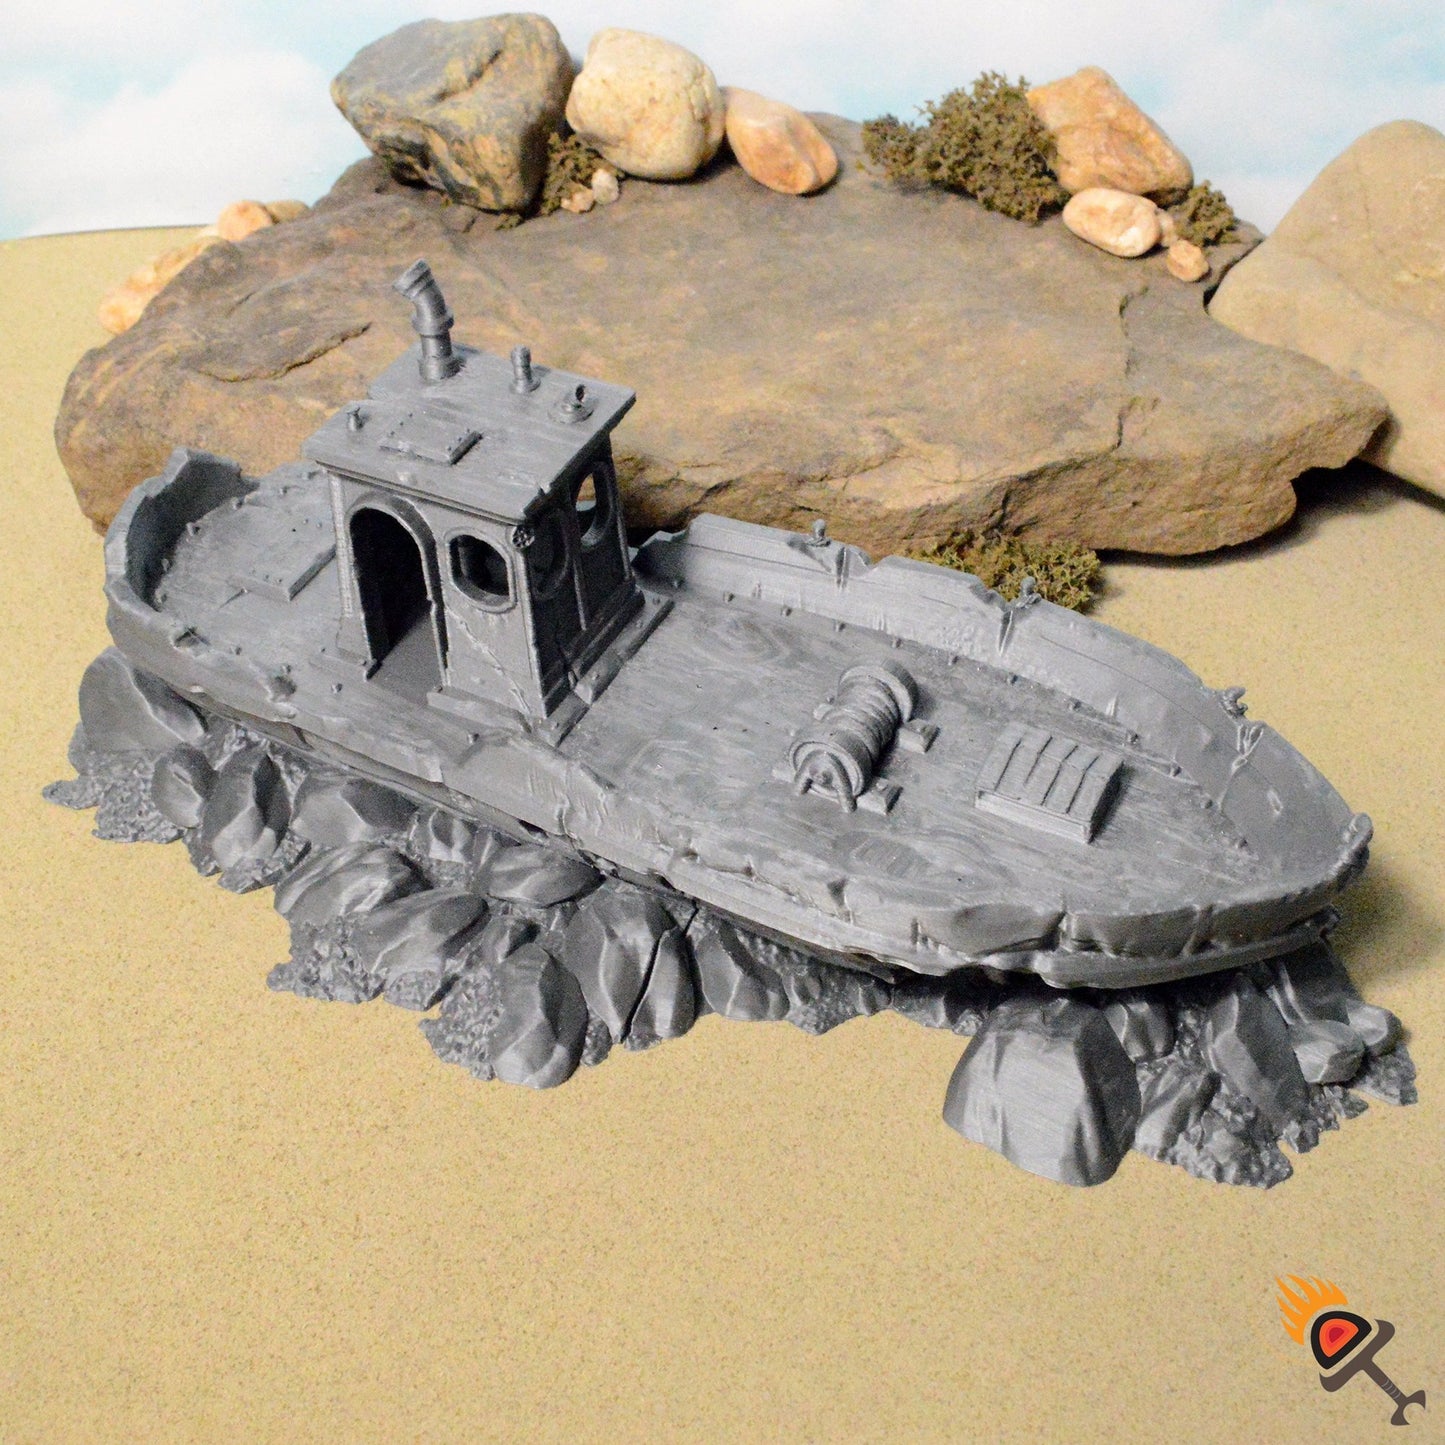 Ruined Fishing Boat 15mm 20mm 28mm 32mm for Gaslands Terrain, Fallout Urban Post Apocalyptic Wrecked Ship, This is Not a Test